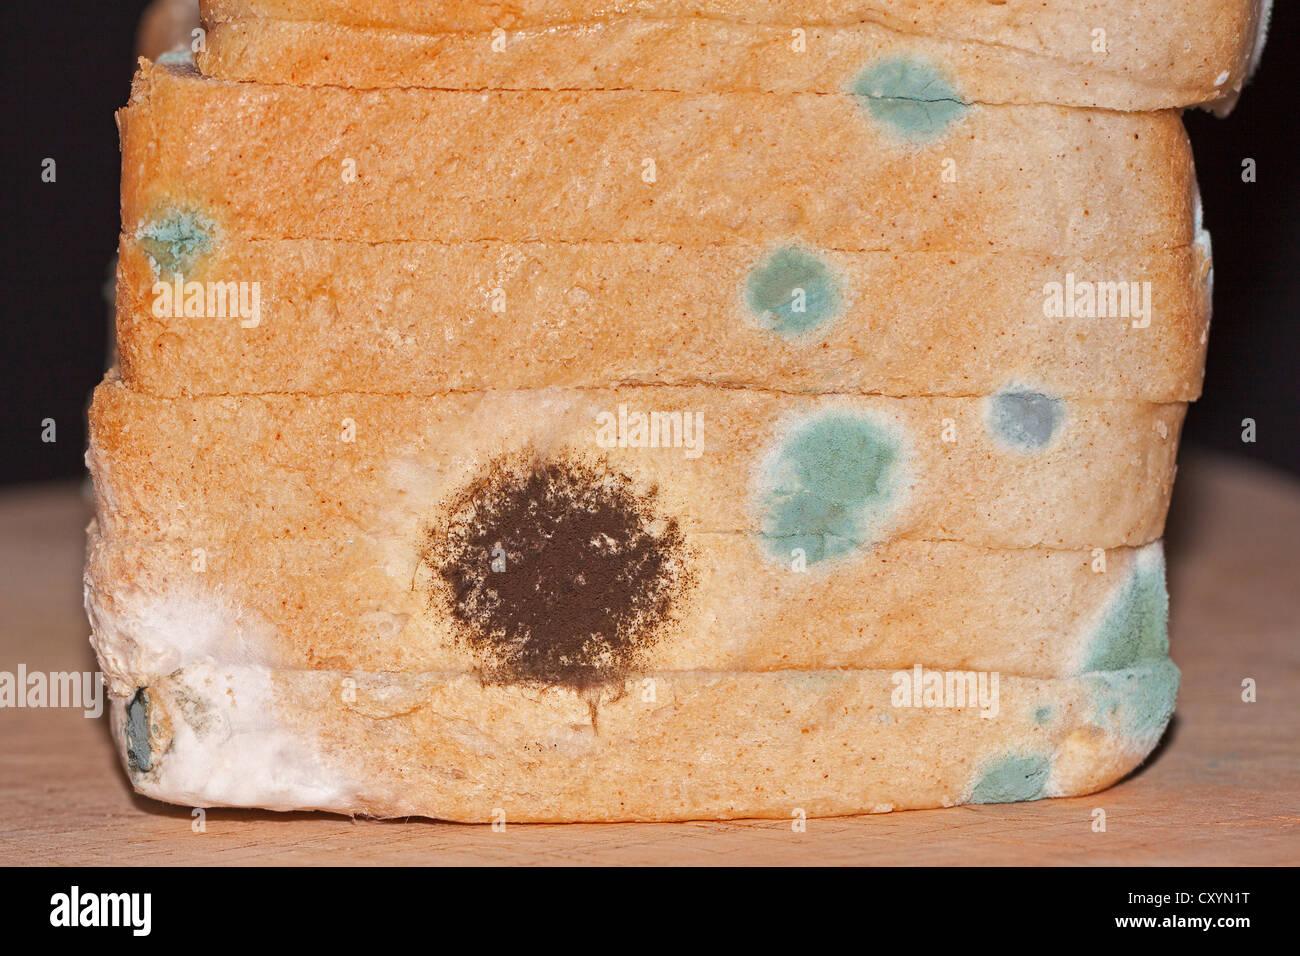 Mould, mildew, mould damage, mould cultures on toast Stock Photo